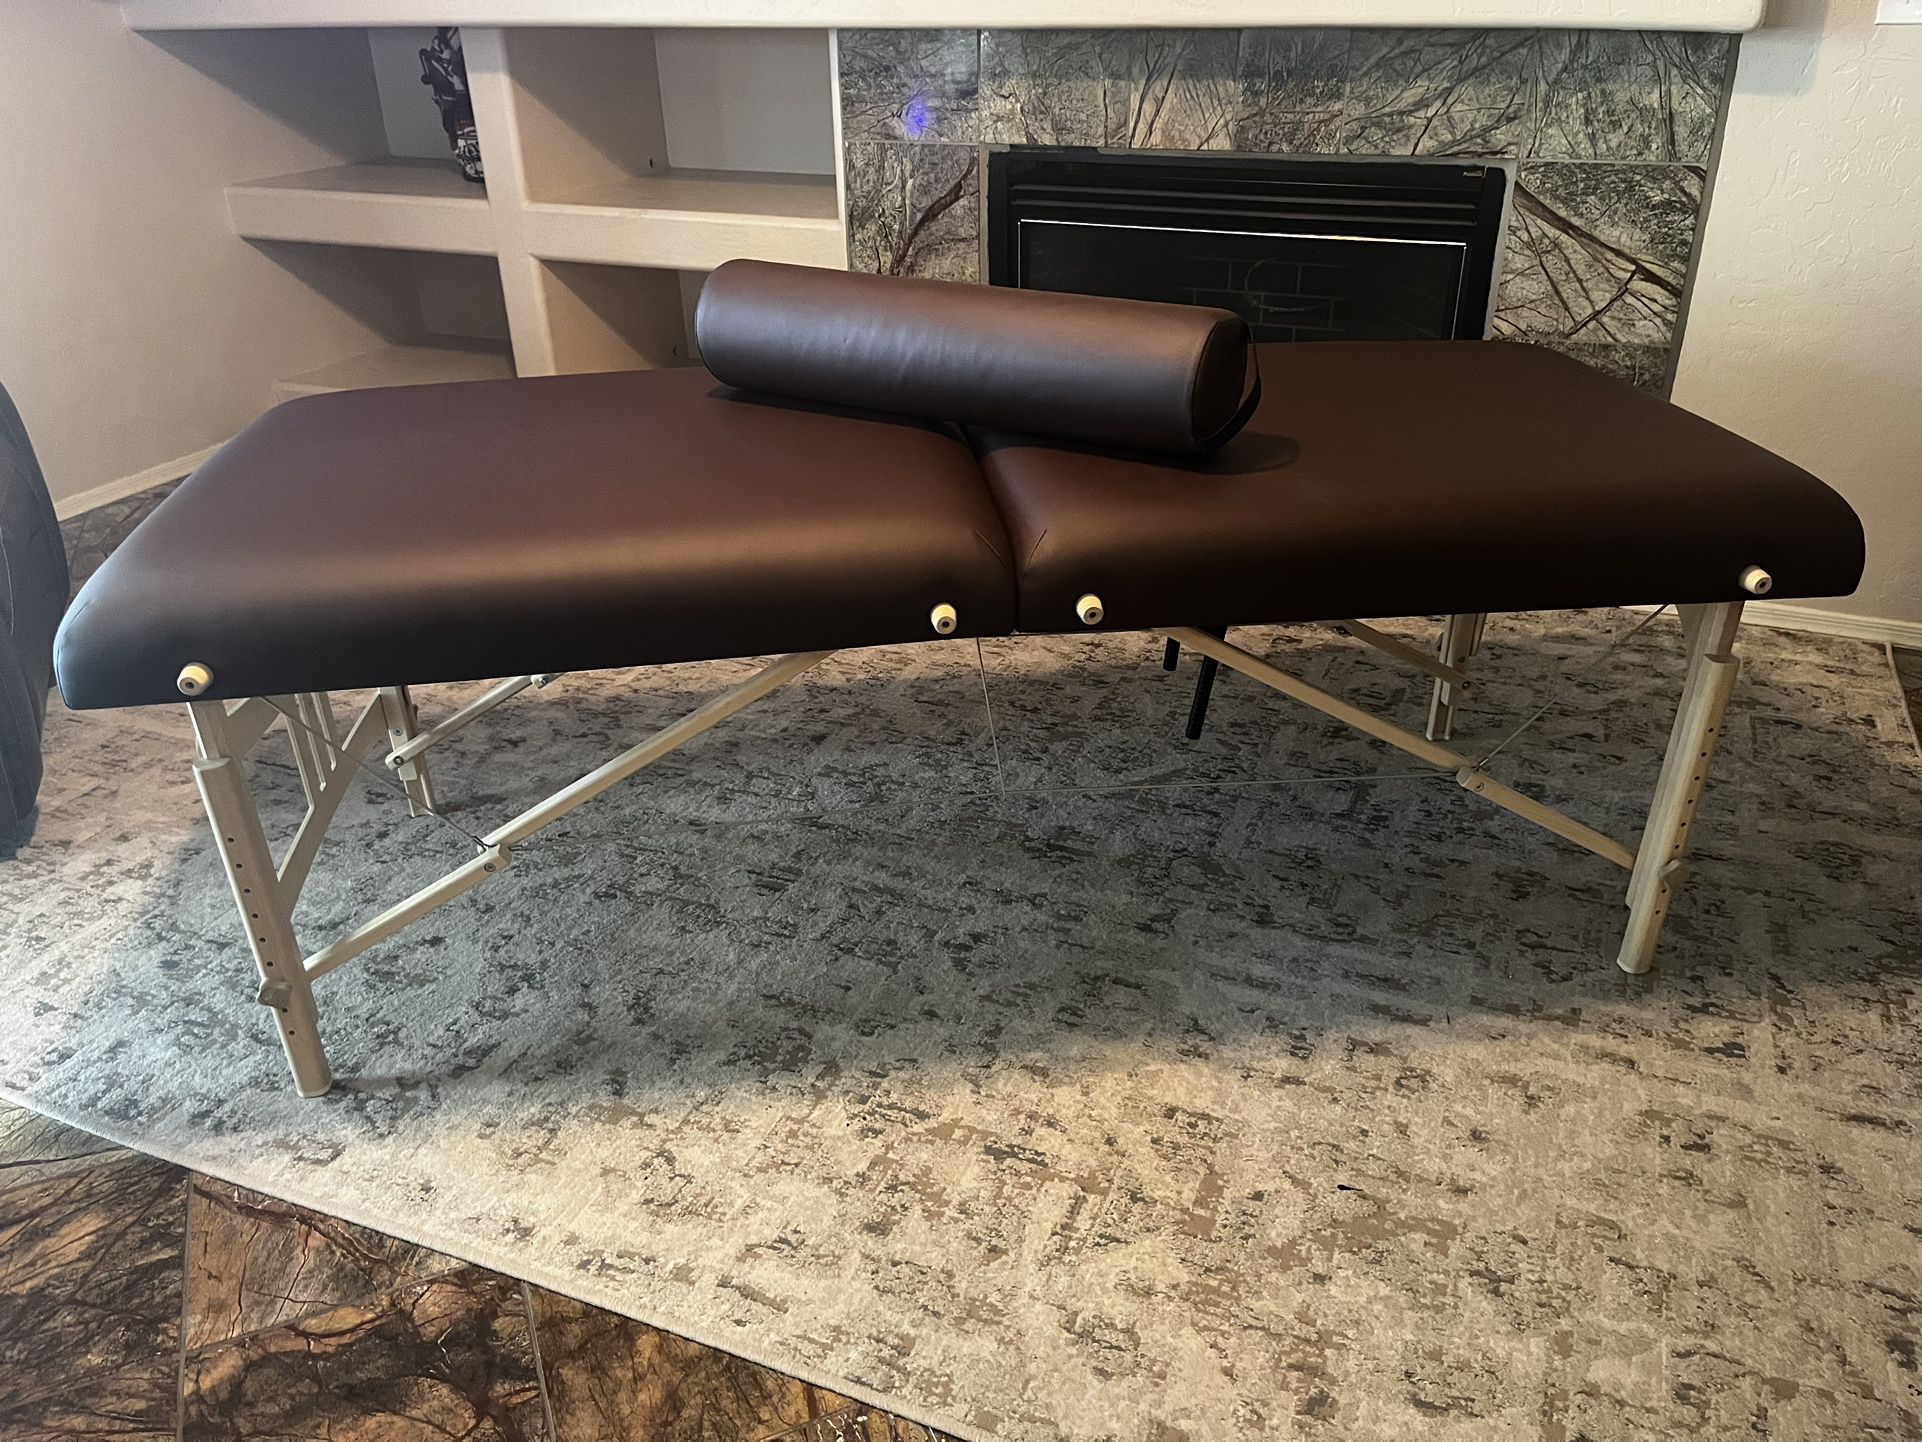 Gently Used Massage Table 